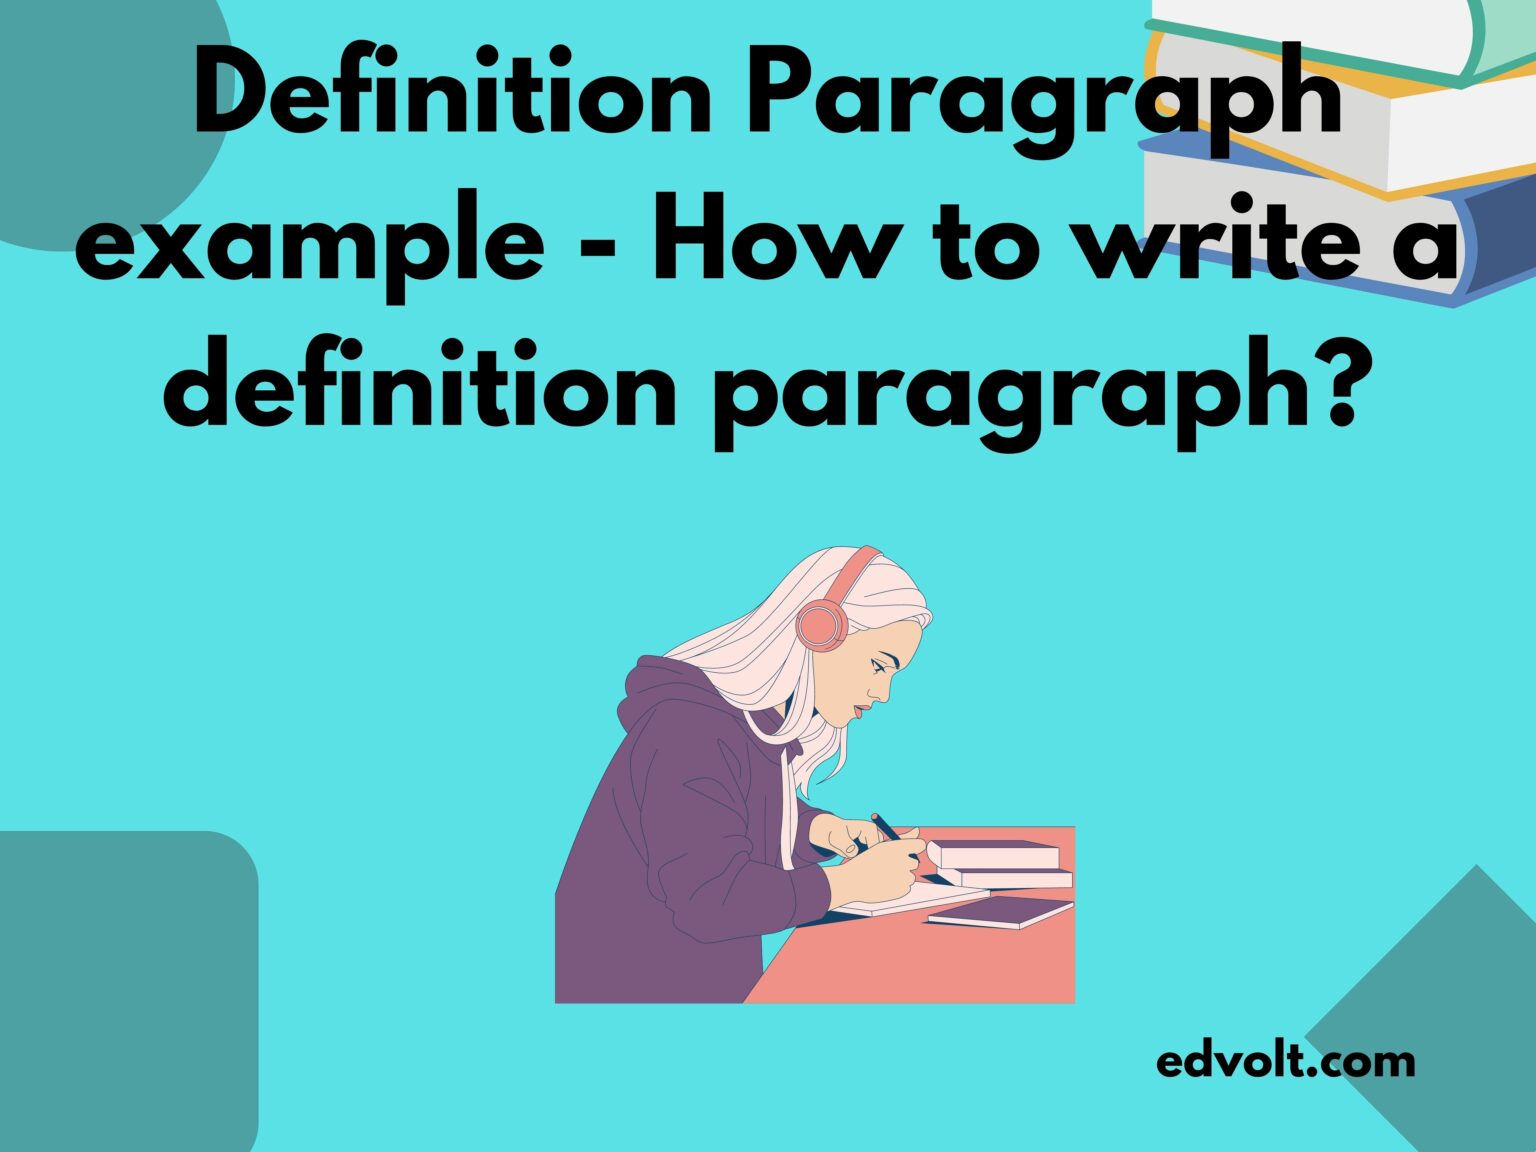 Definition Paragraph example - How to write a definition paragraph?